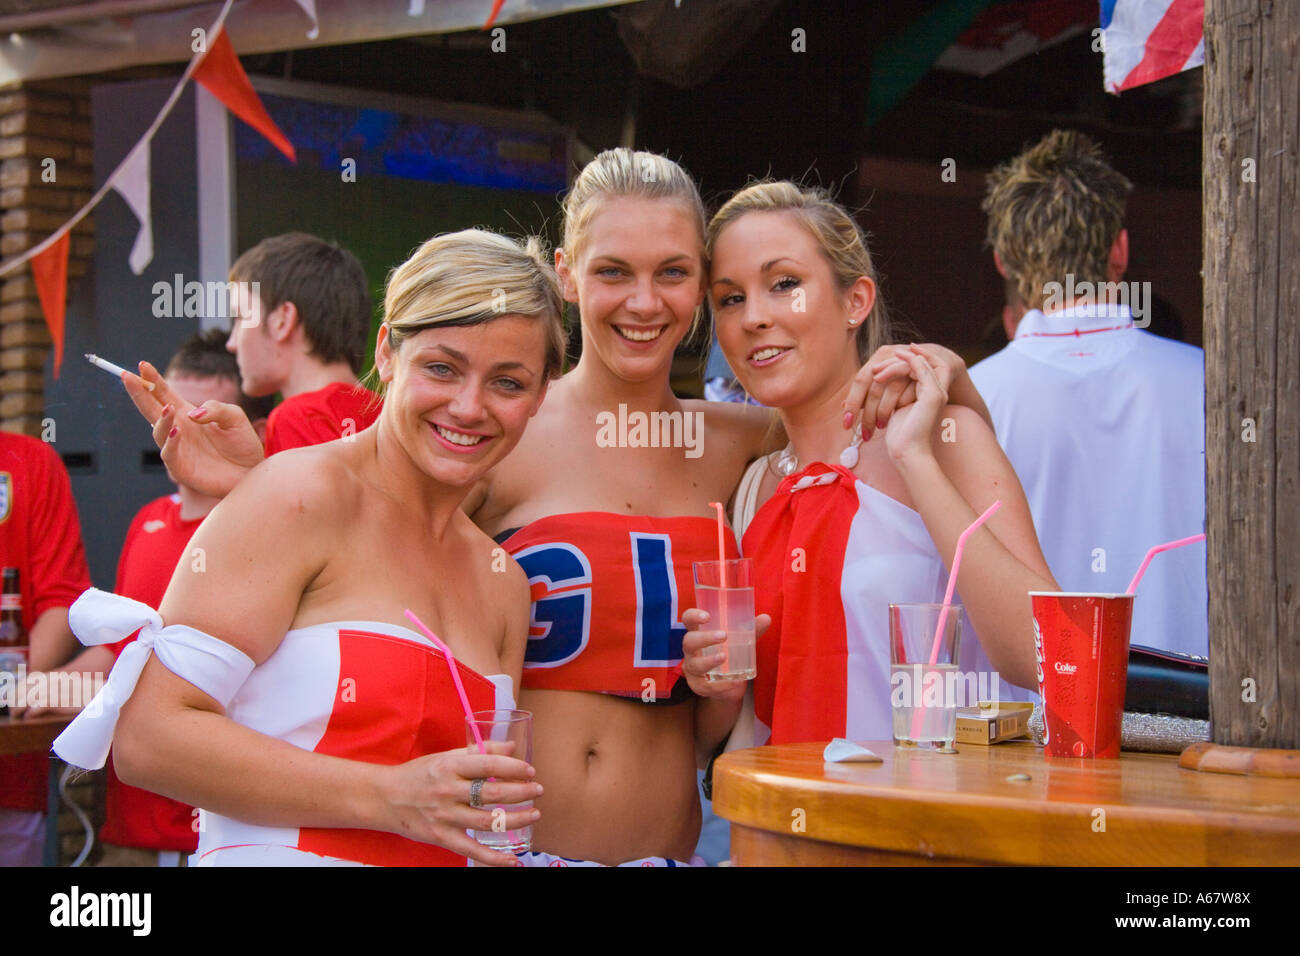 three-young-women-england-soccer-fans-in-kavos-corfu-after-england-A67W8X.jpg